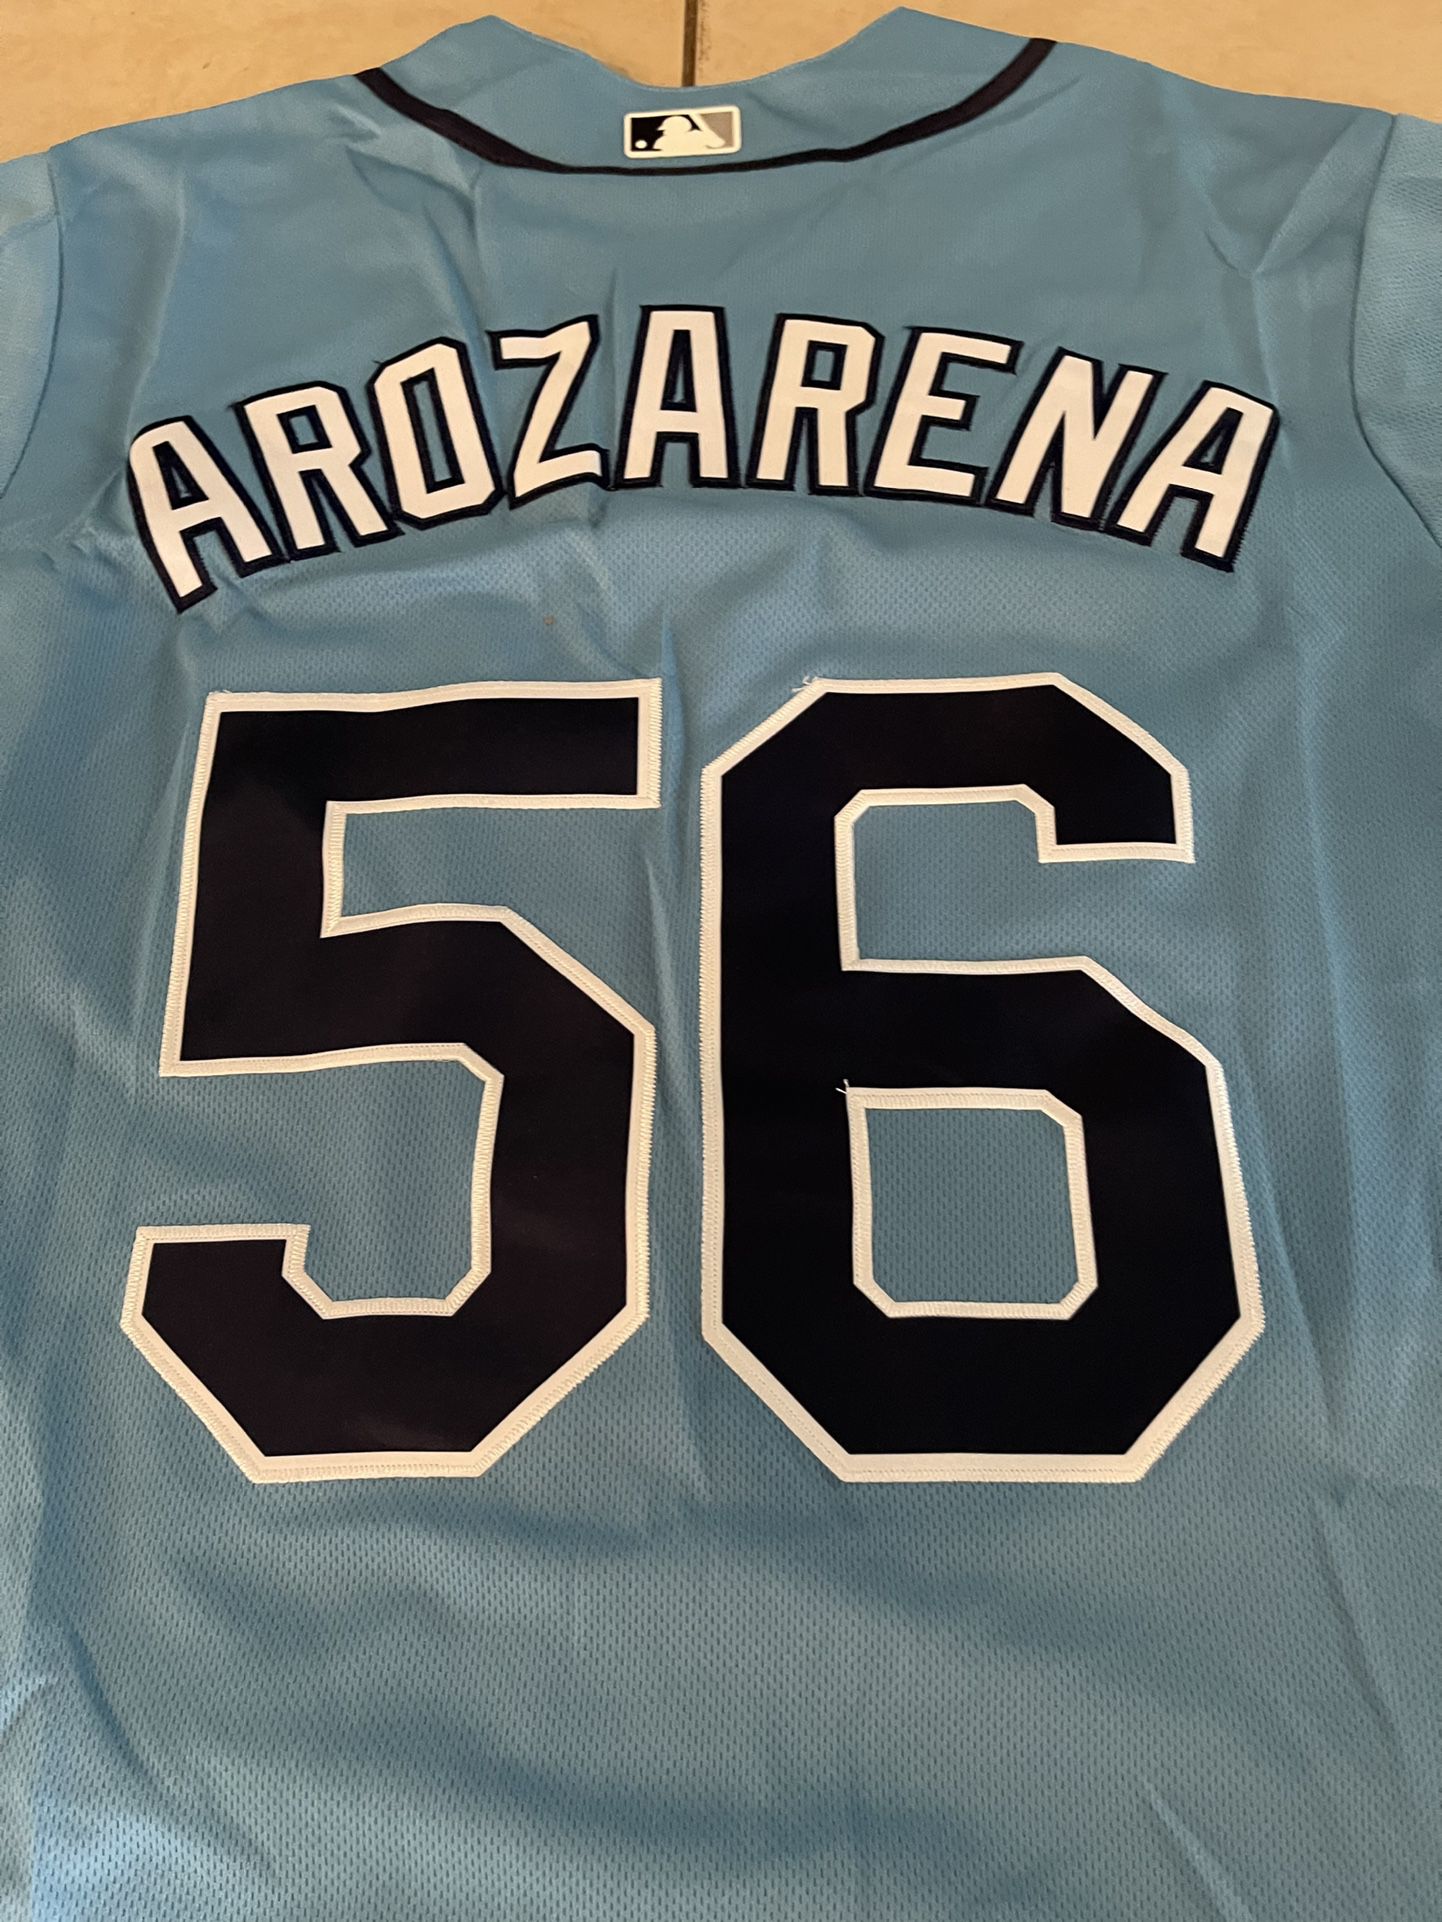 Game Used 25th Anniversary Navy Jersey: Randy Arozarena - 4 HR, 15 RBI, 9  H, 6 R - 6 Games - Size 44 S1